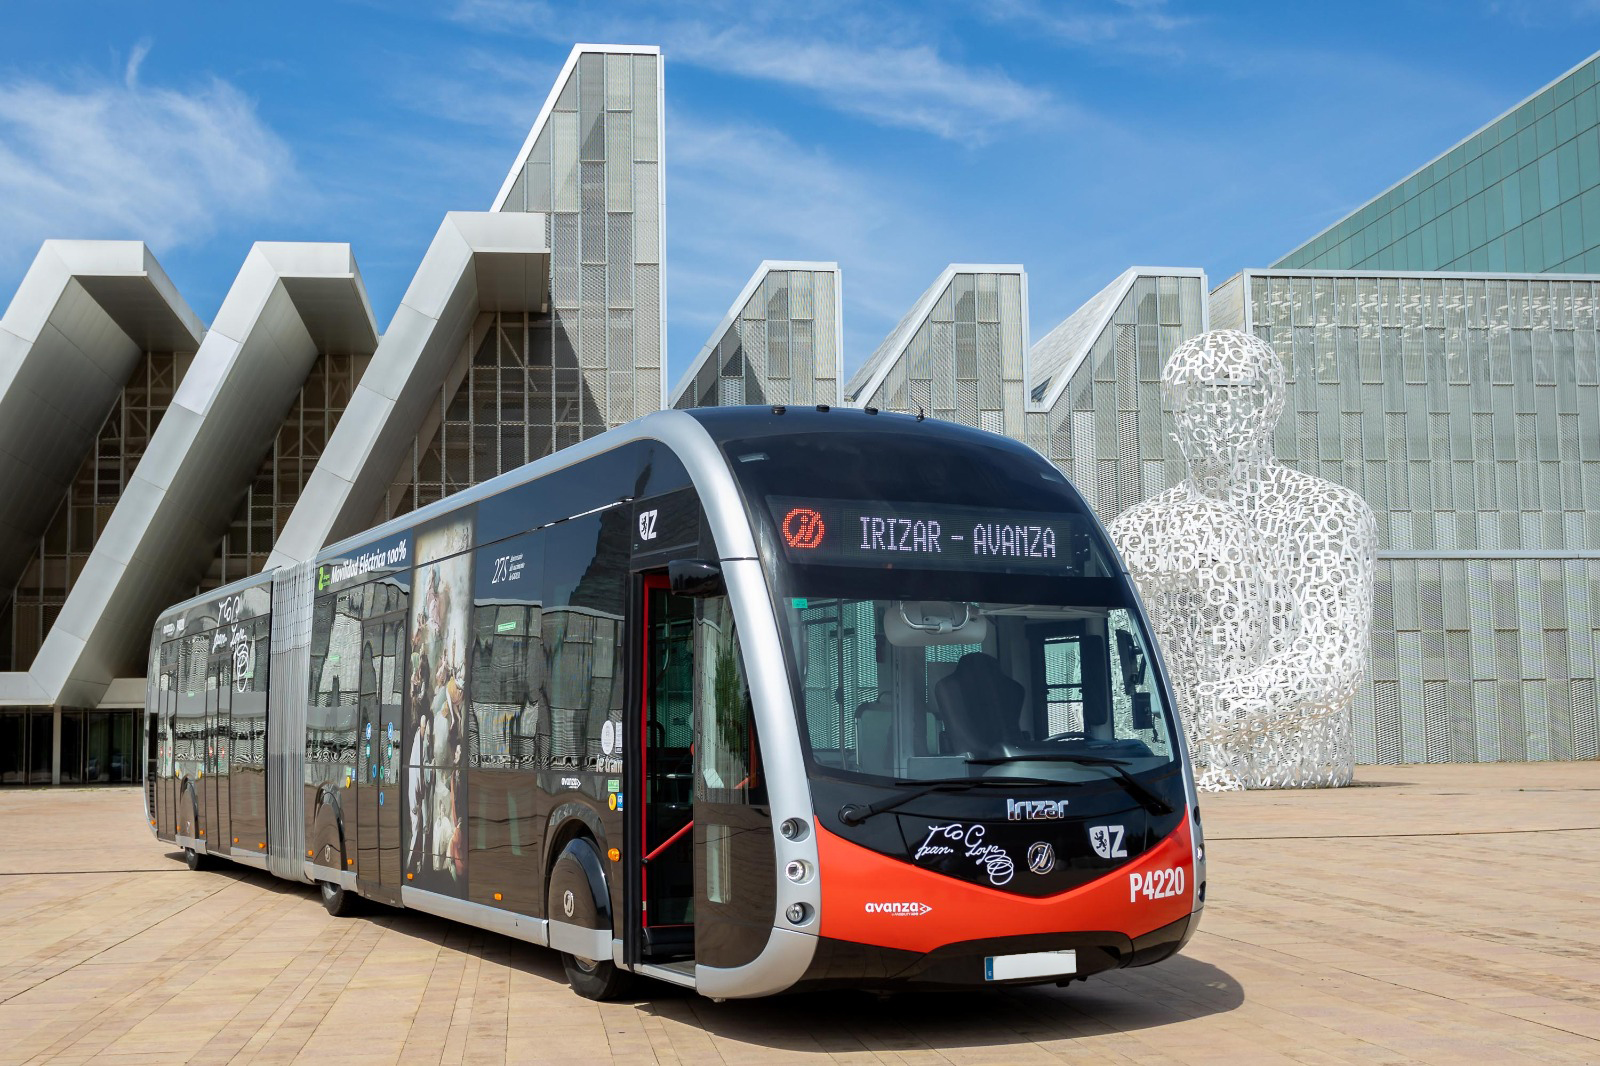 Zaragoza City Council and Avanza are committing to Irizar e-mobility electric buses to renew their fleet